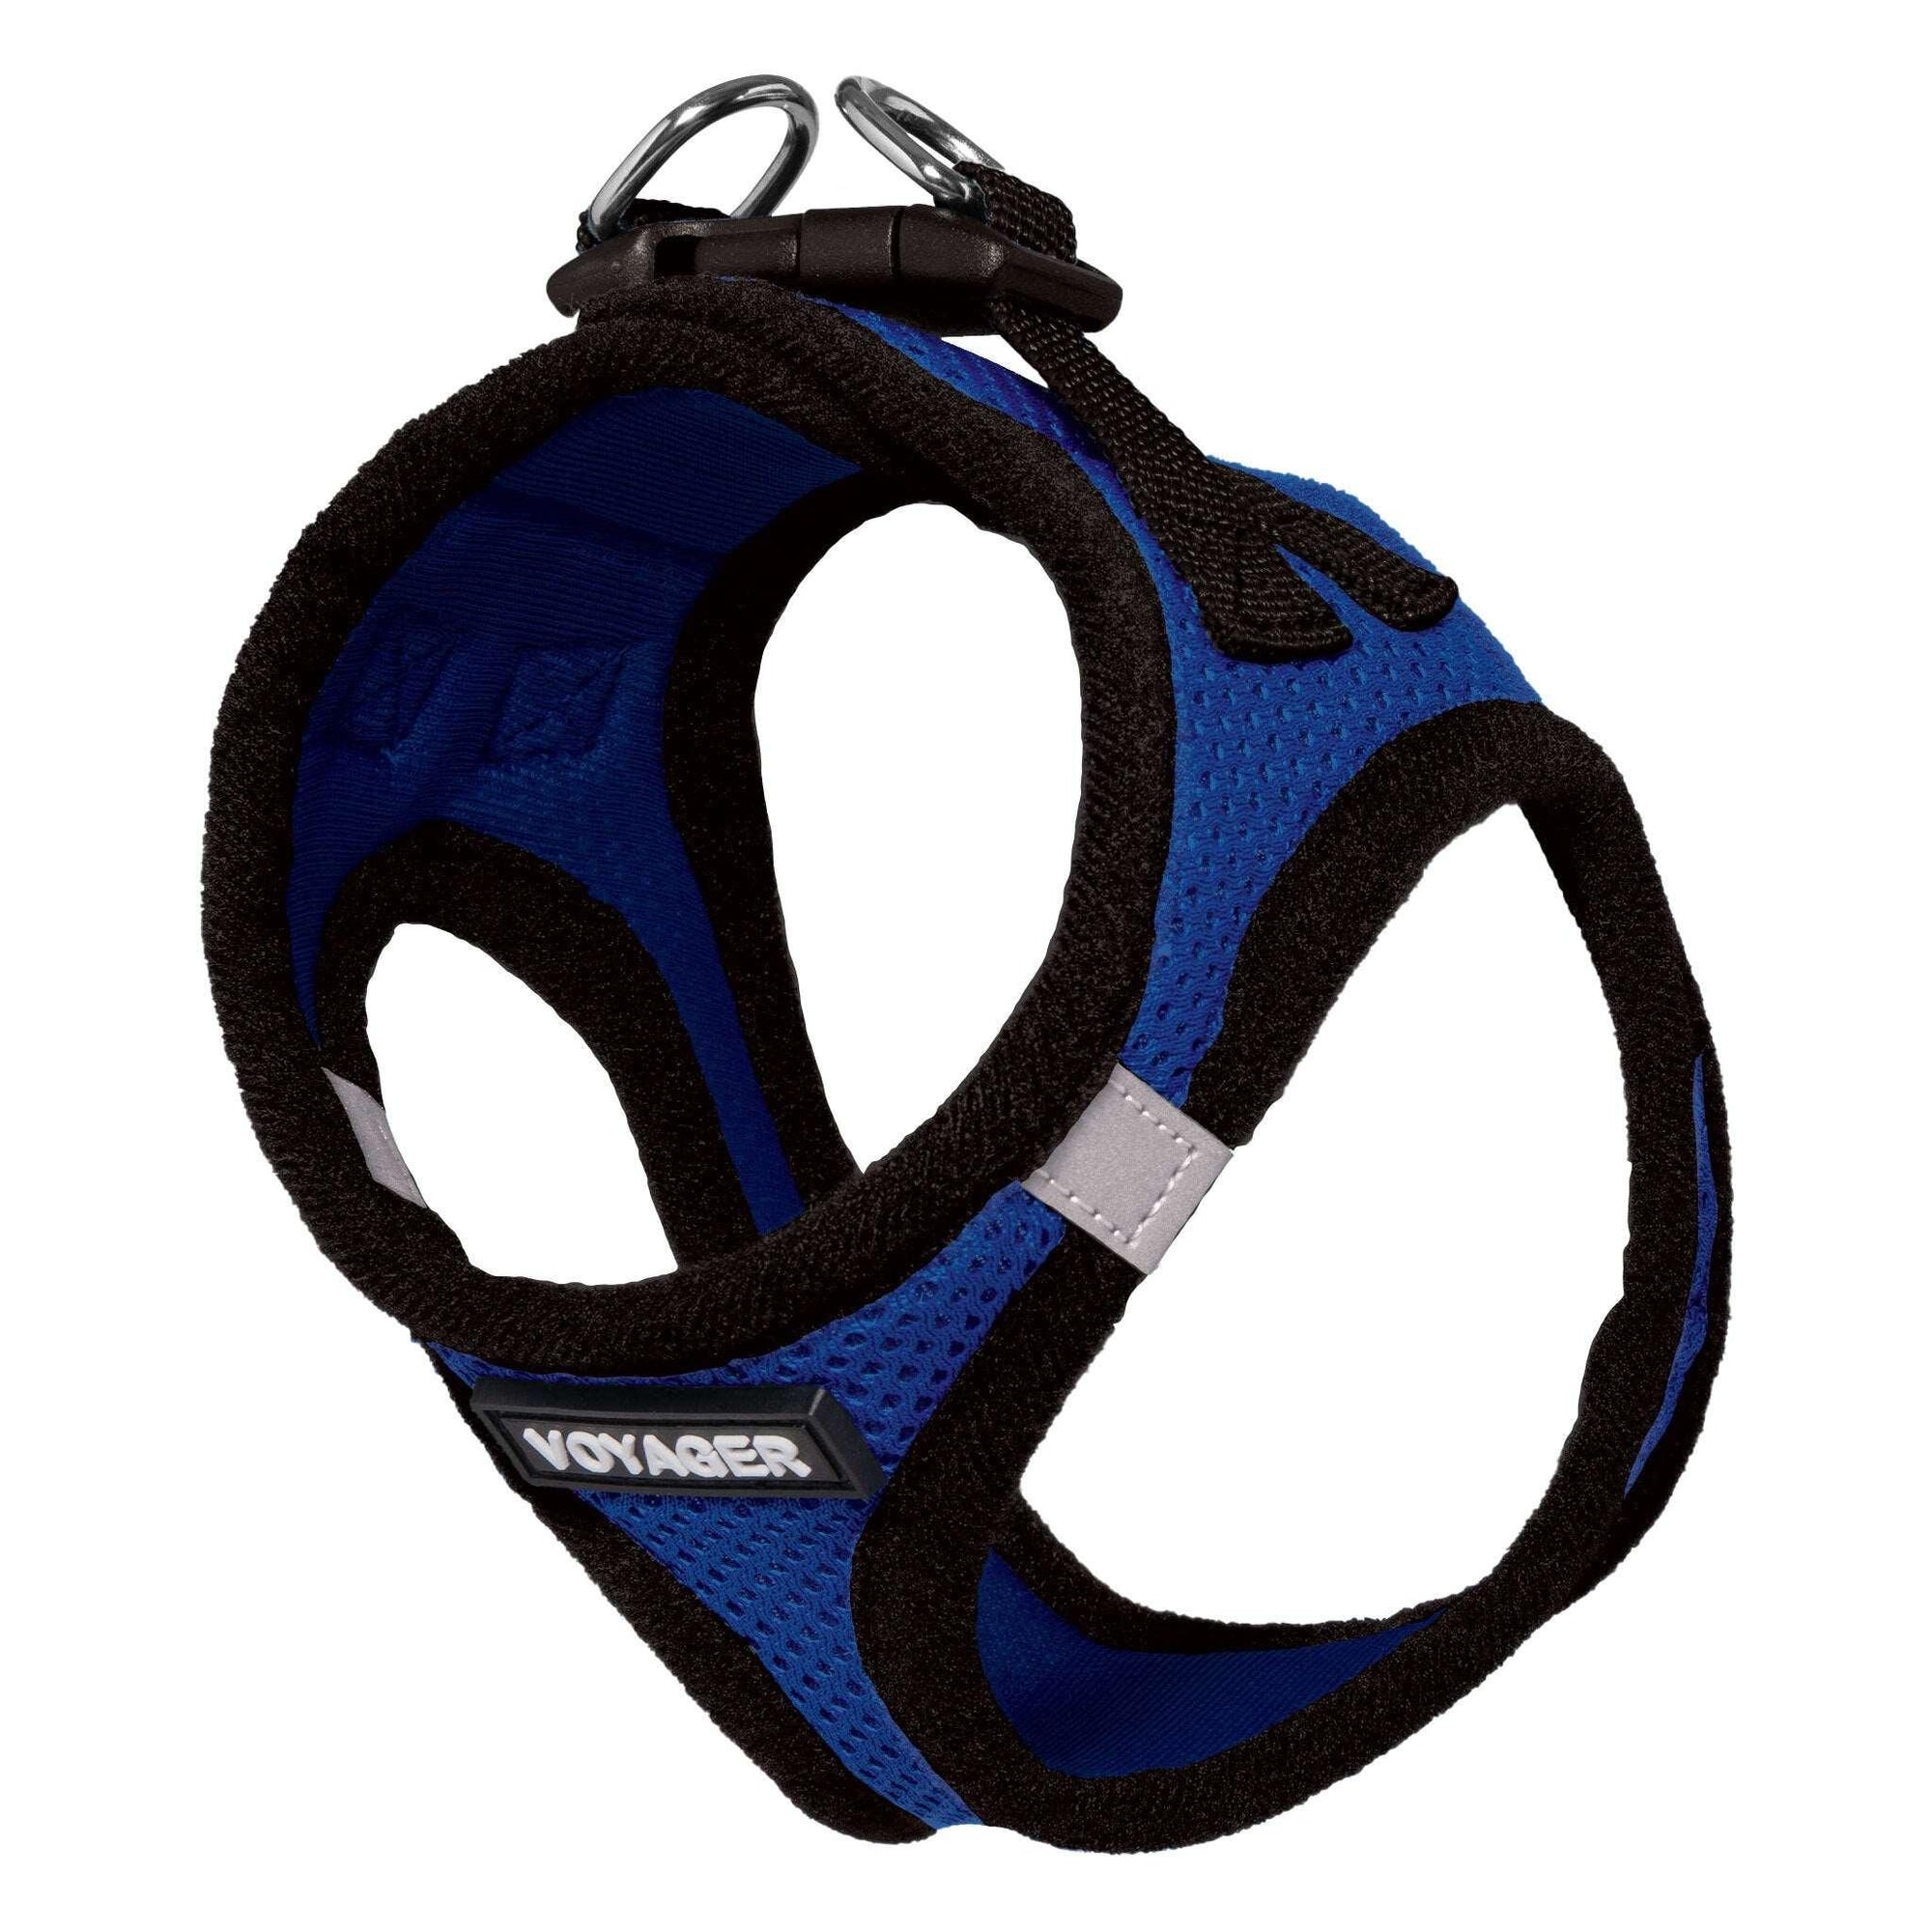 VOYAGER Step-In Air Pet Harness in Royal Blue with Black Trim - Expanded